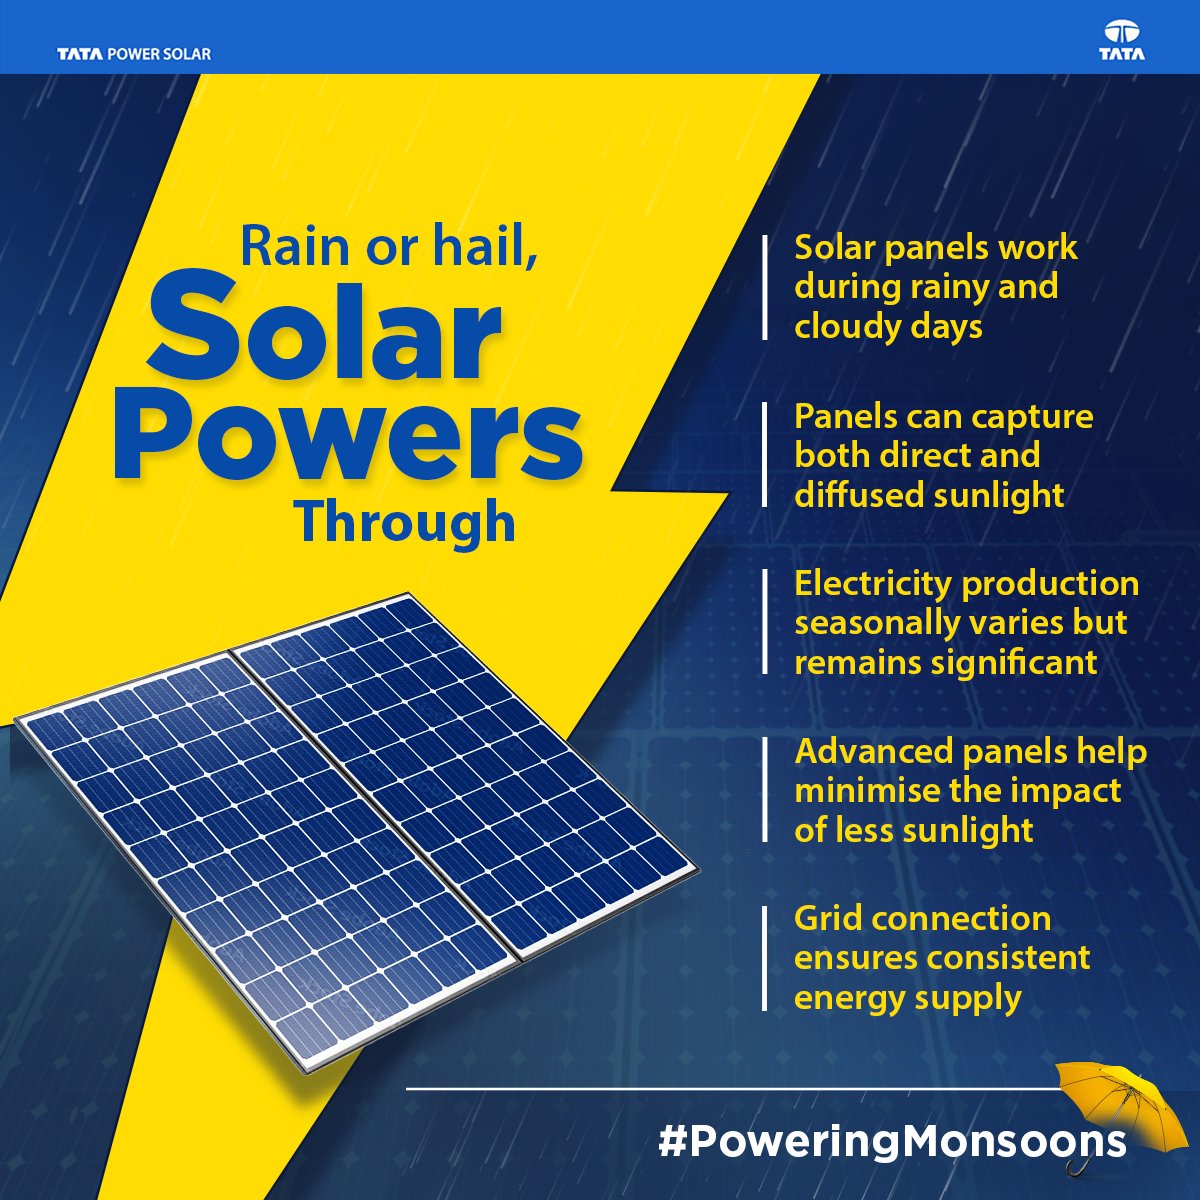 Always thought monsoons hinder solar power generation? Bust the myths and learn how solar can thrive even in less sunlight. Switch to green energy with Tata Power Renewables and power through monsoons sustainably.

#PoweringMonsoons #SolarWorksInMonsoon